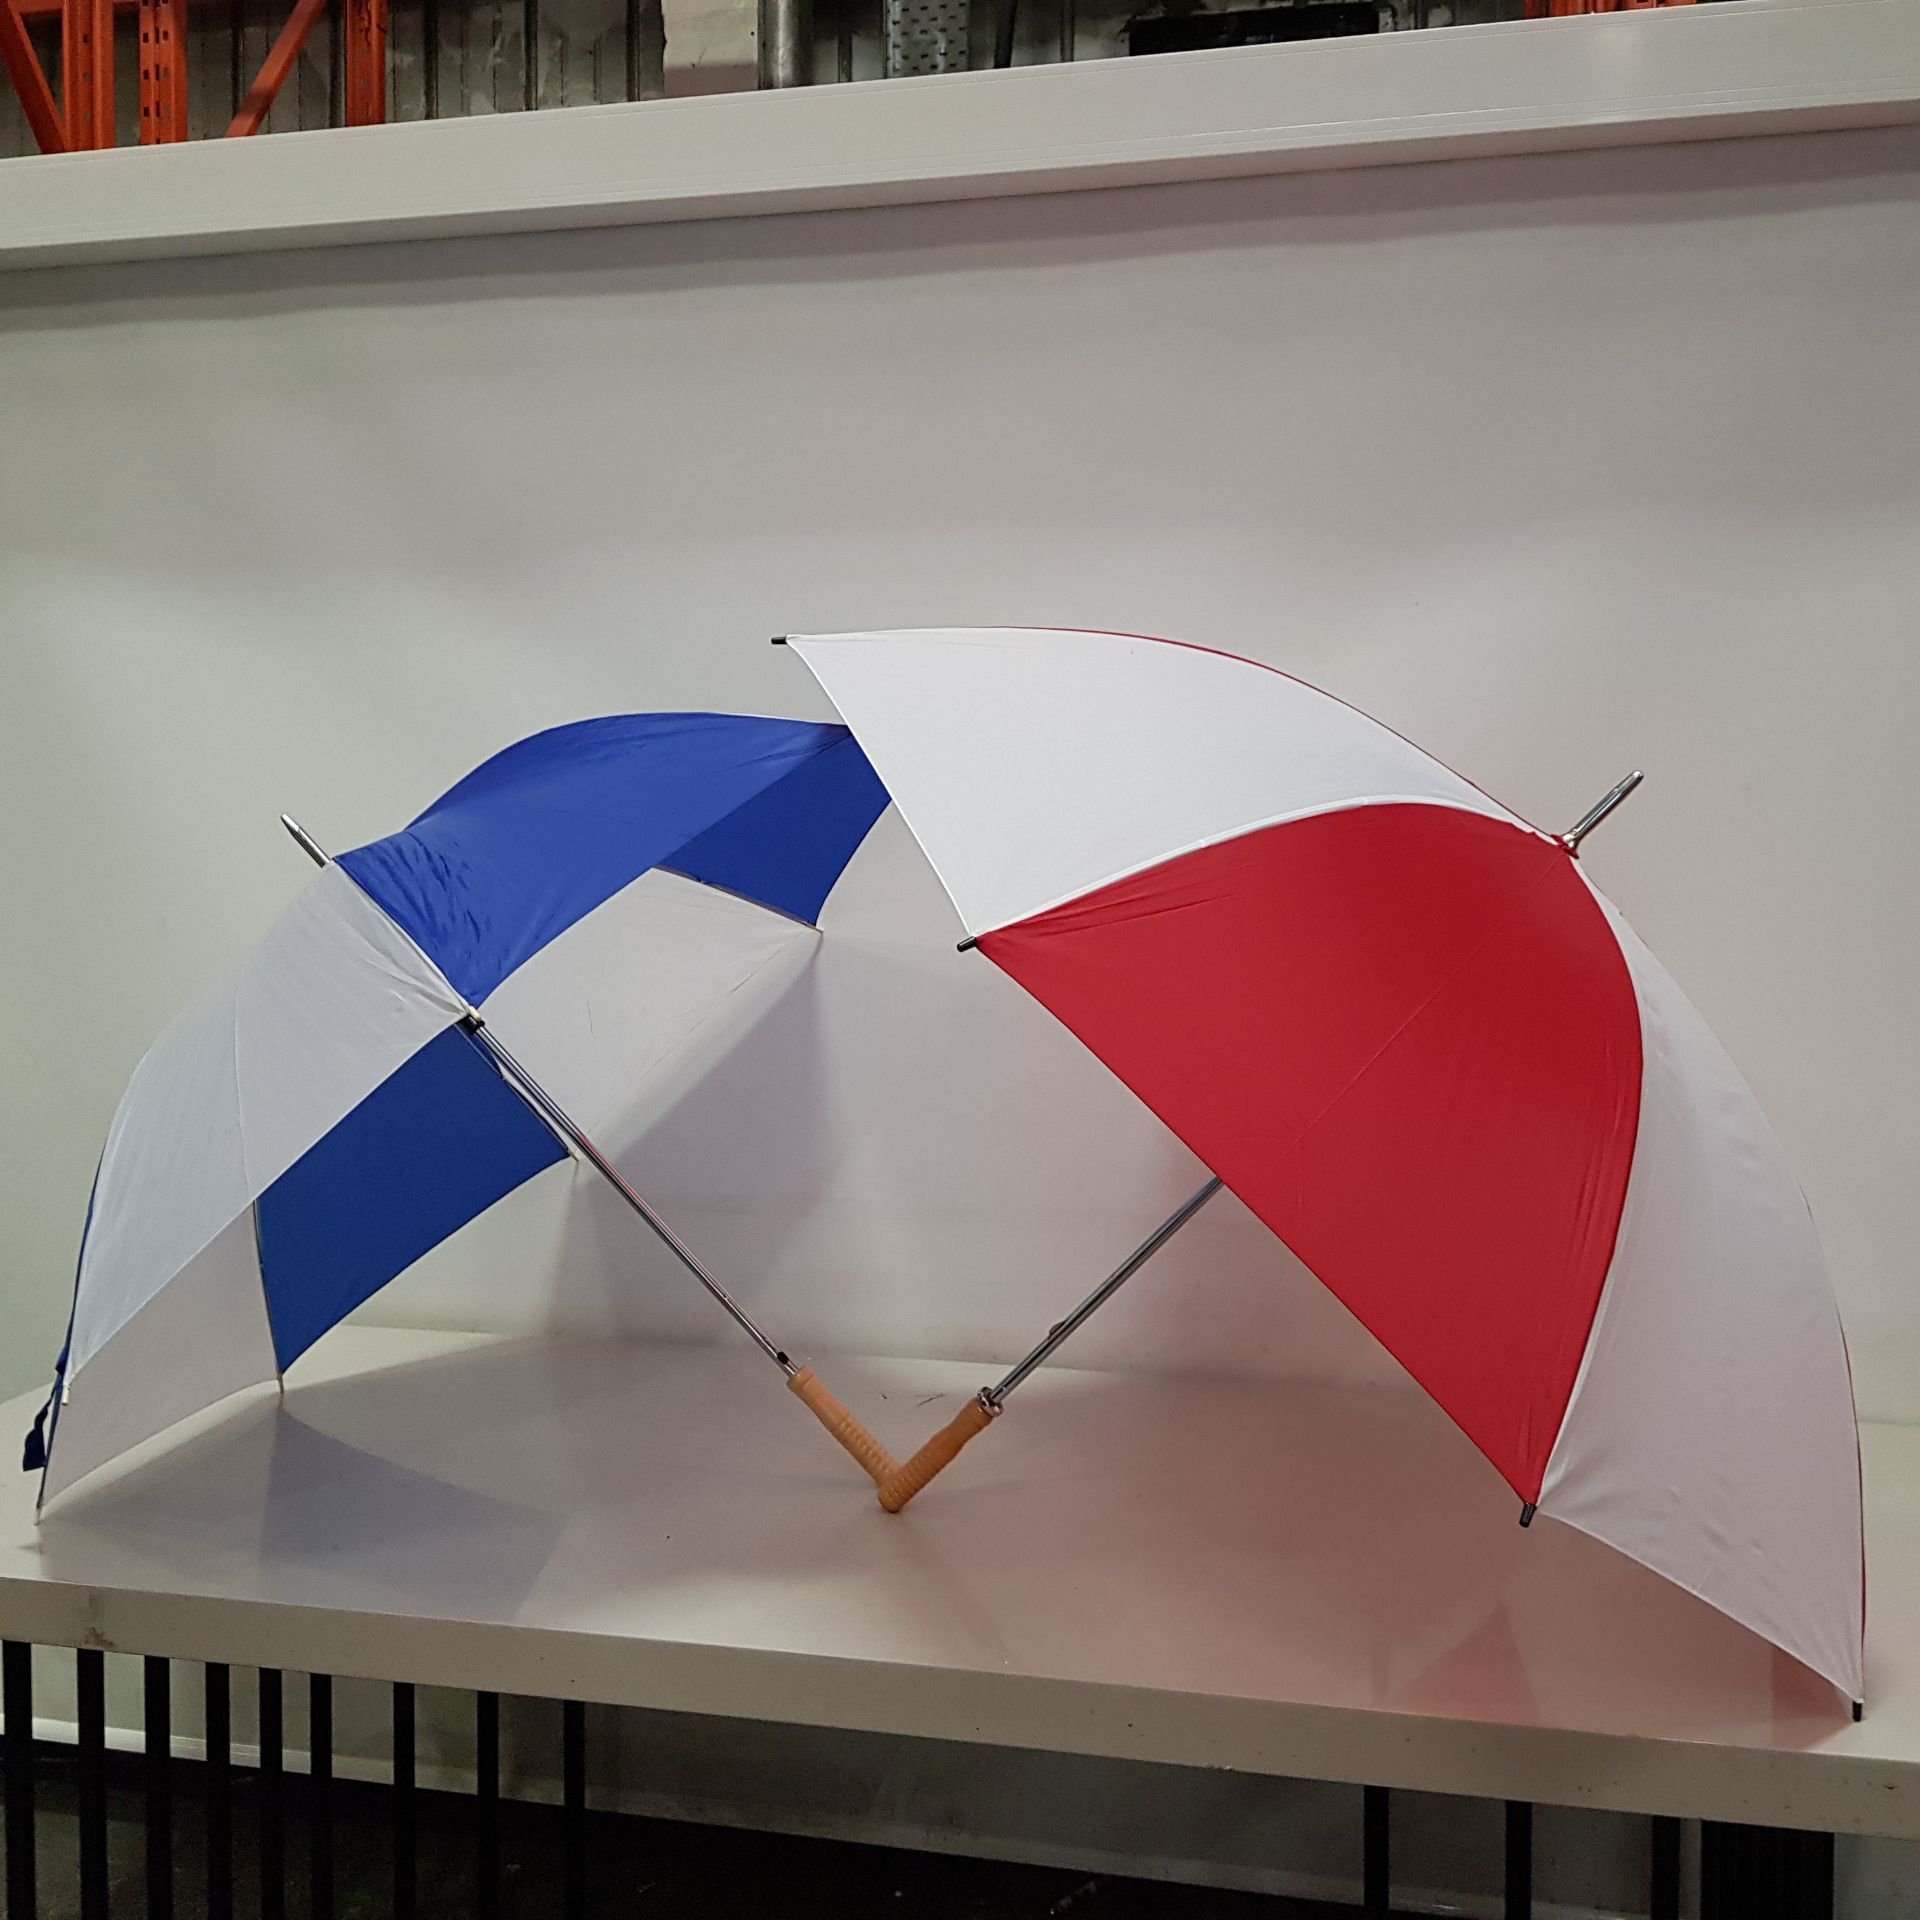 40 X BRAND NEW LARGE UMBRELLAS IN 2 STYLES TO INCLUDE RED & WHITE AND BLUE & WHITE (4 BOXES)